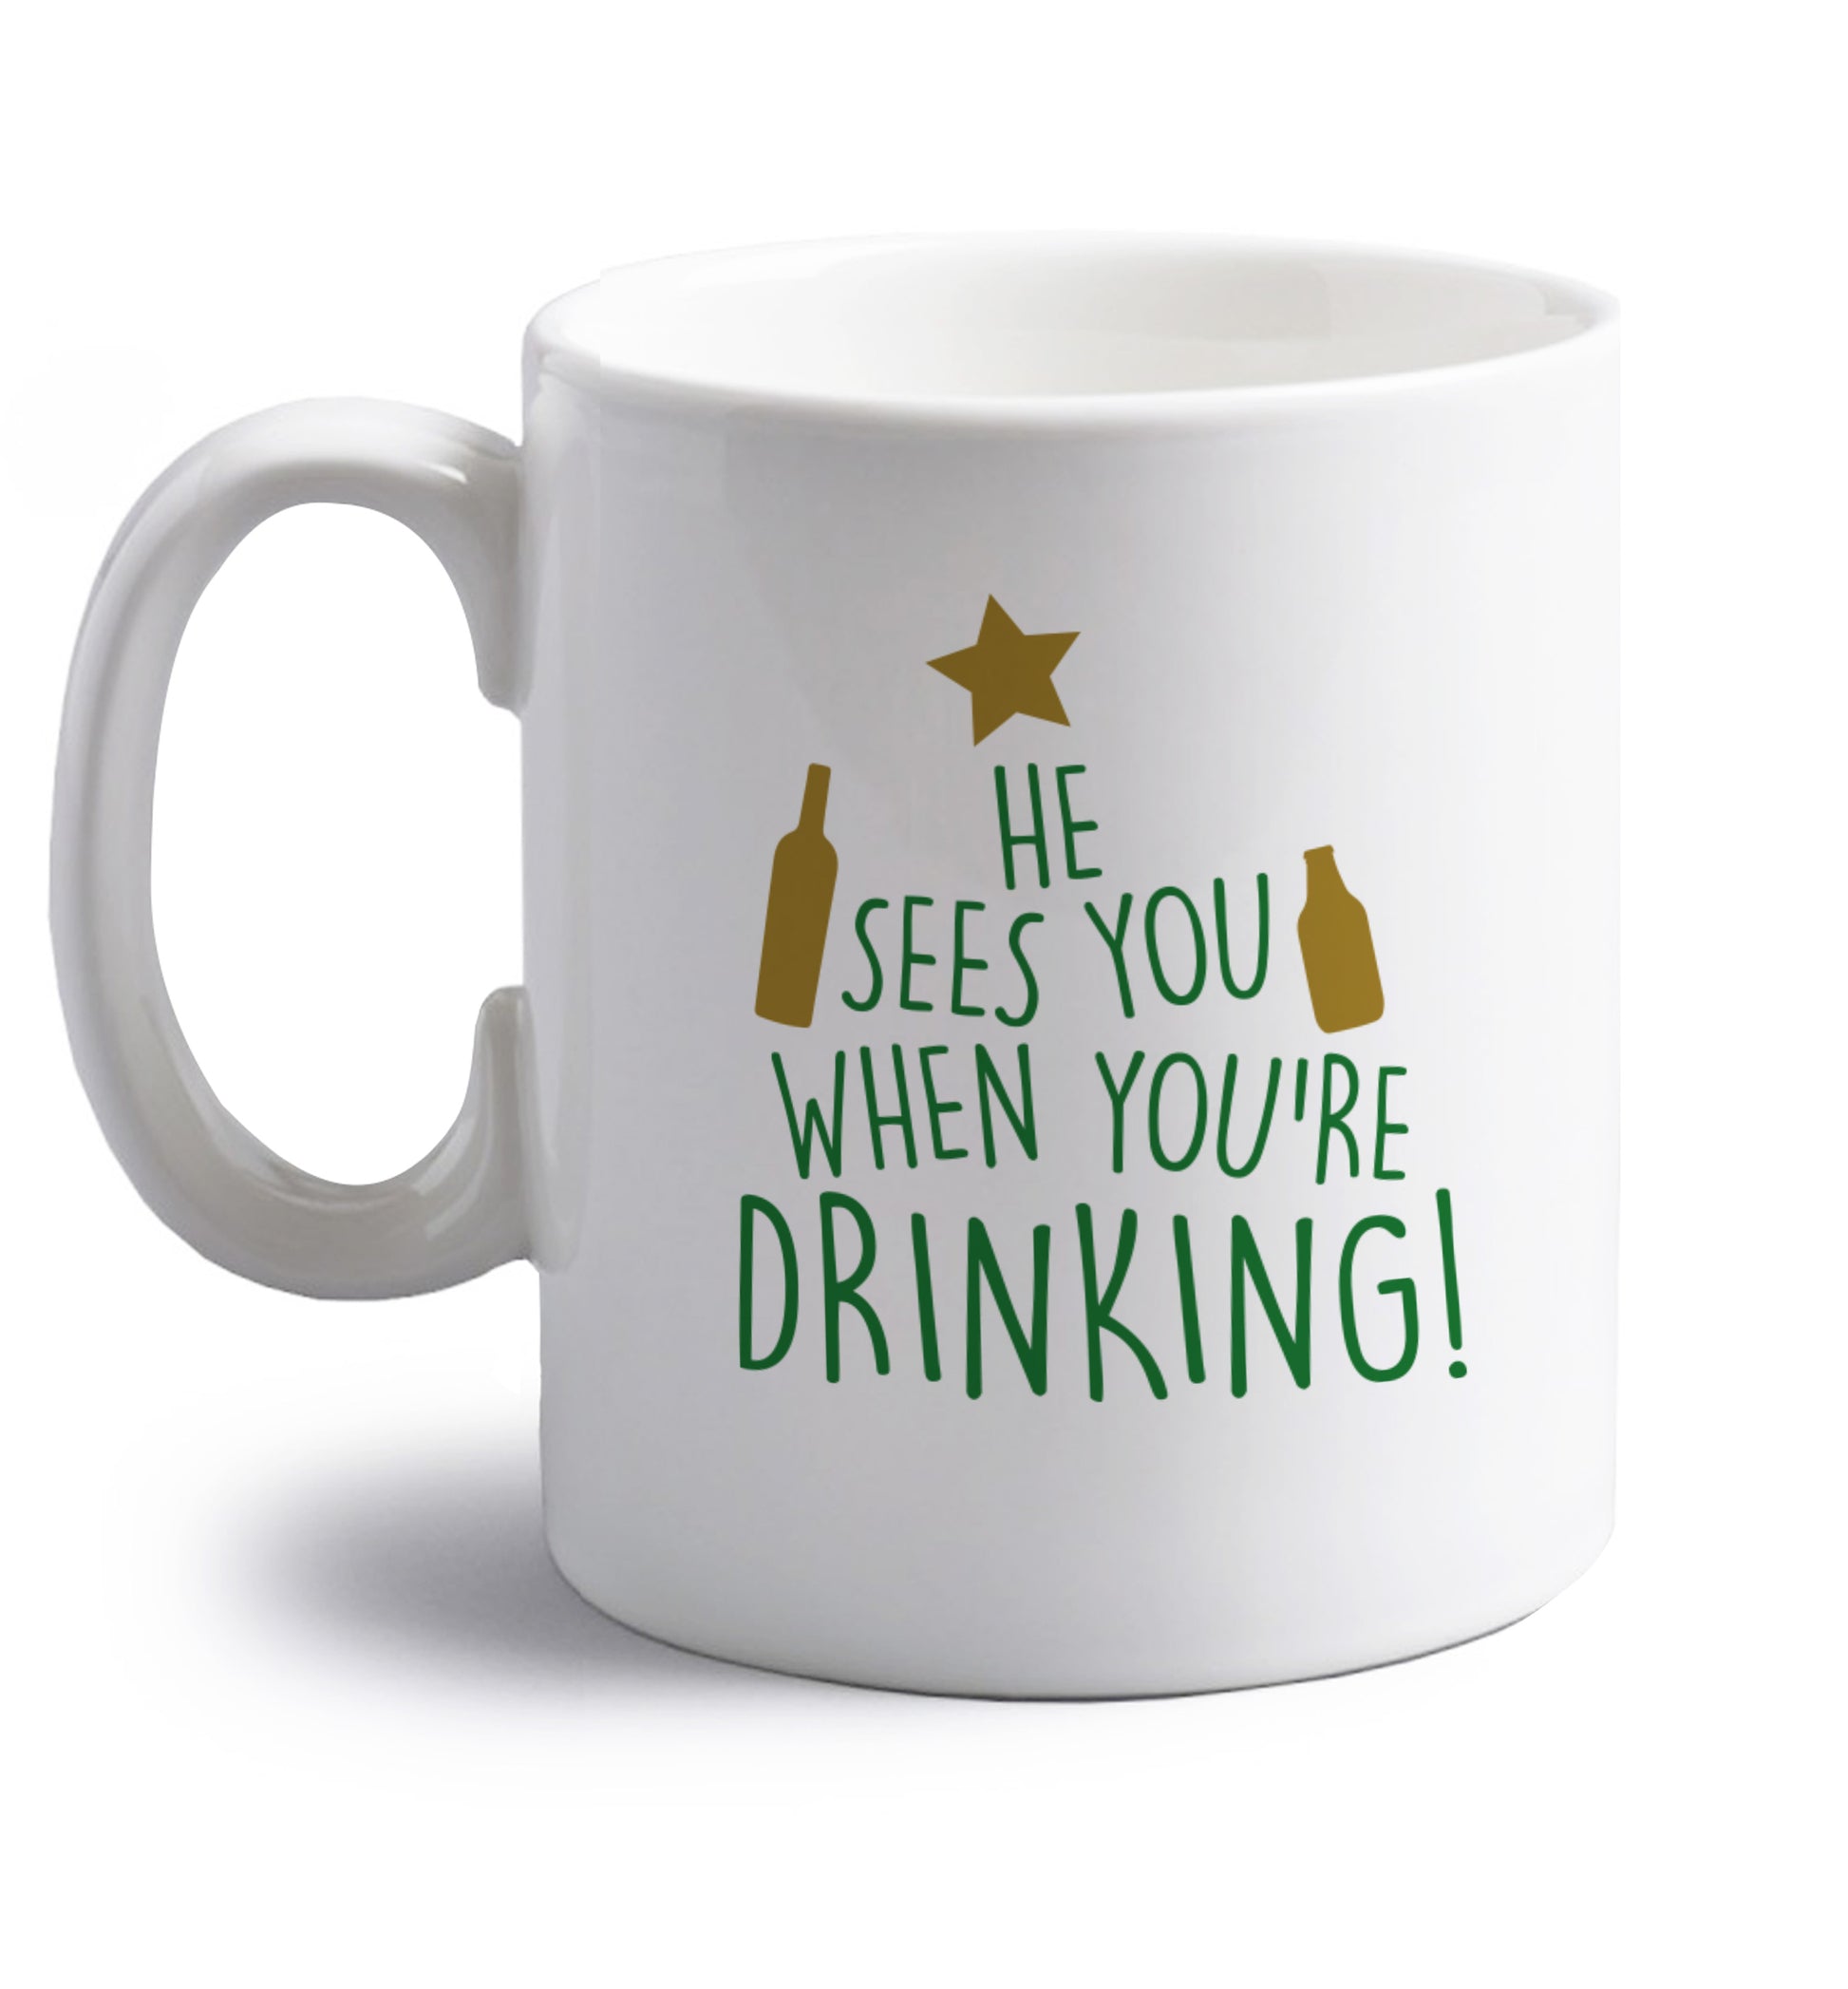 He sees you when you're drinking right handed white ceramic mug 